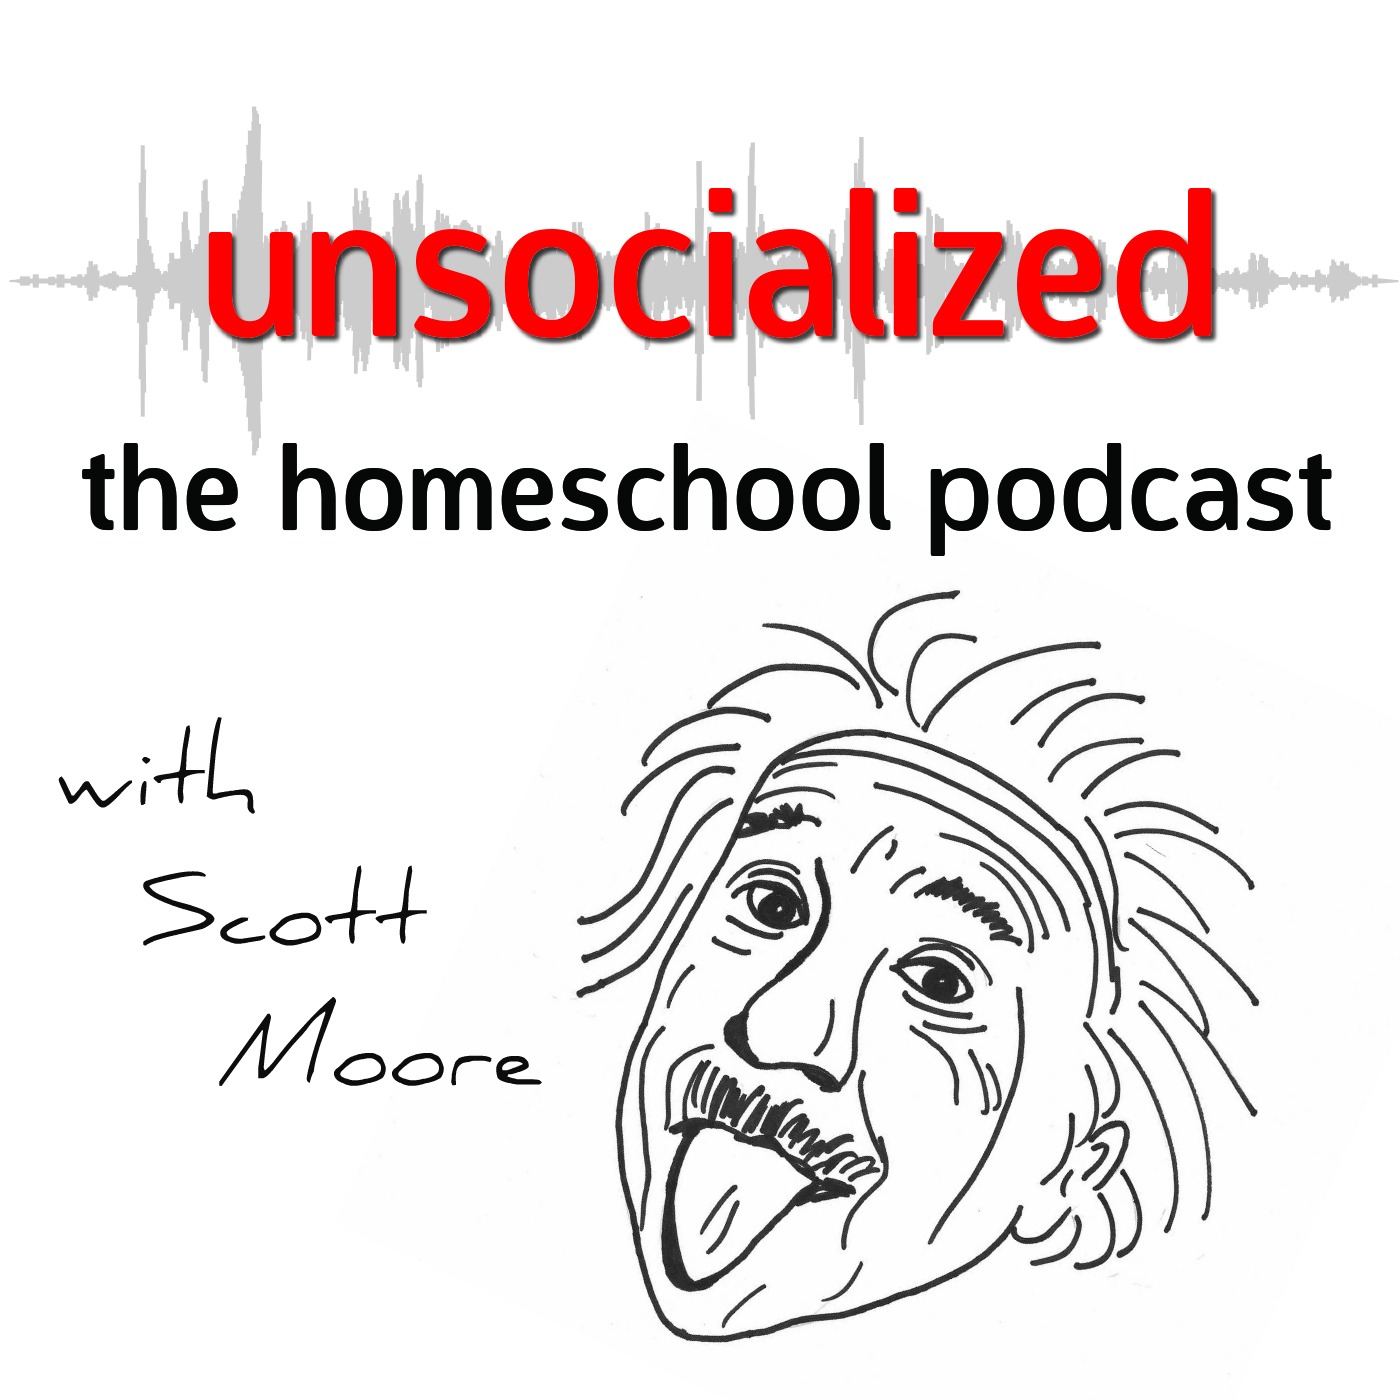 Unsocialized: The Homeschool Podcast with Scott Moore